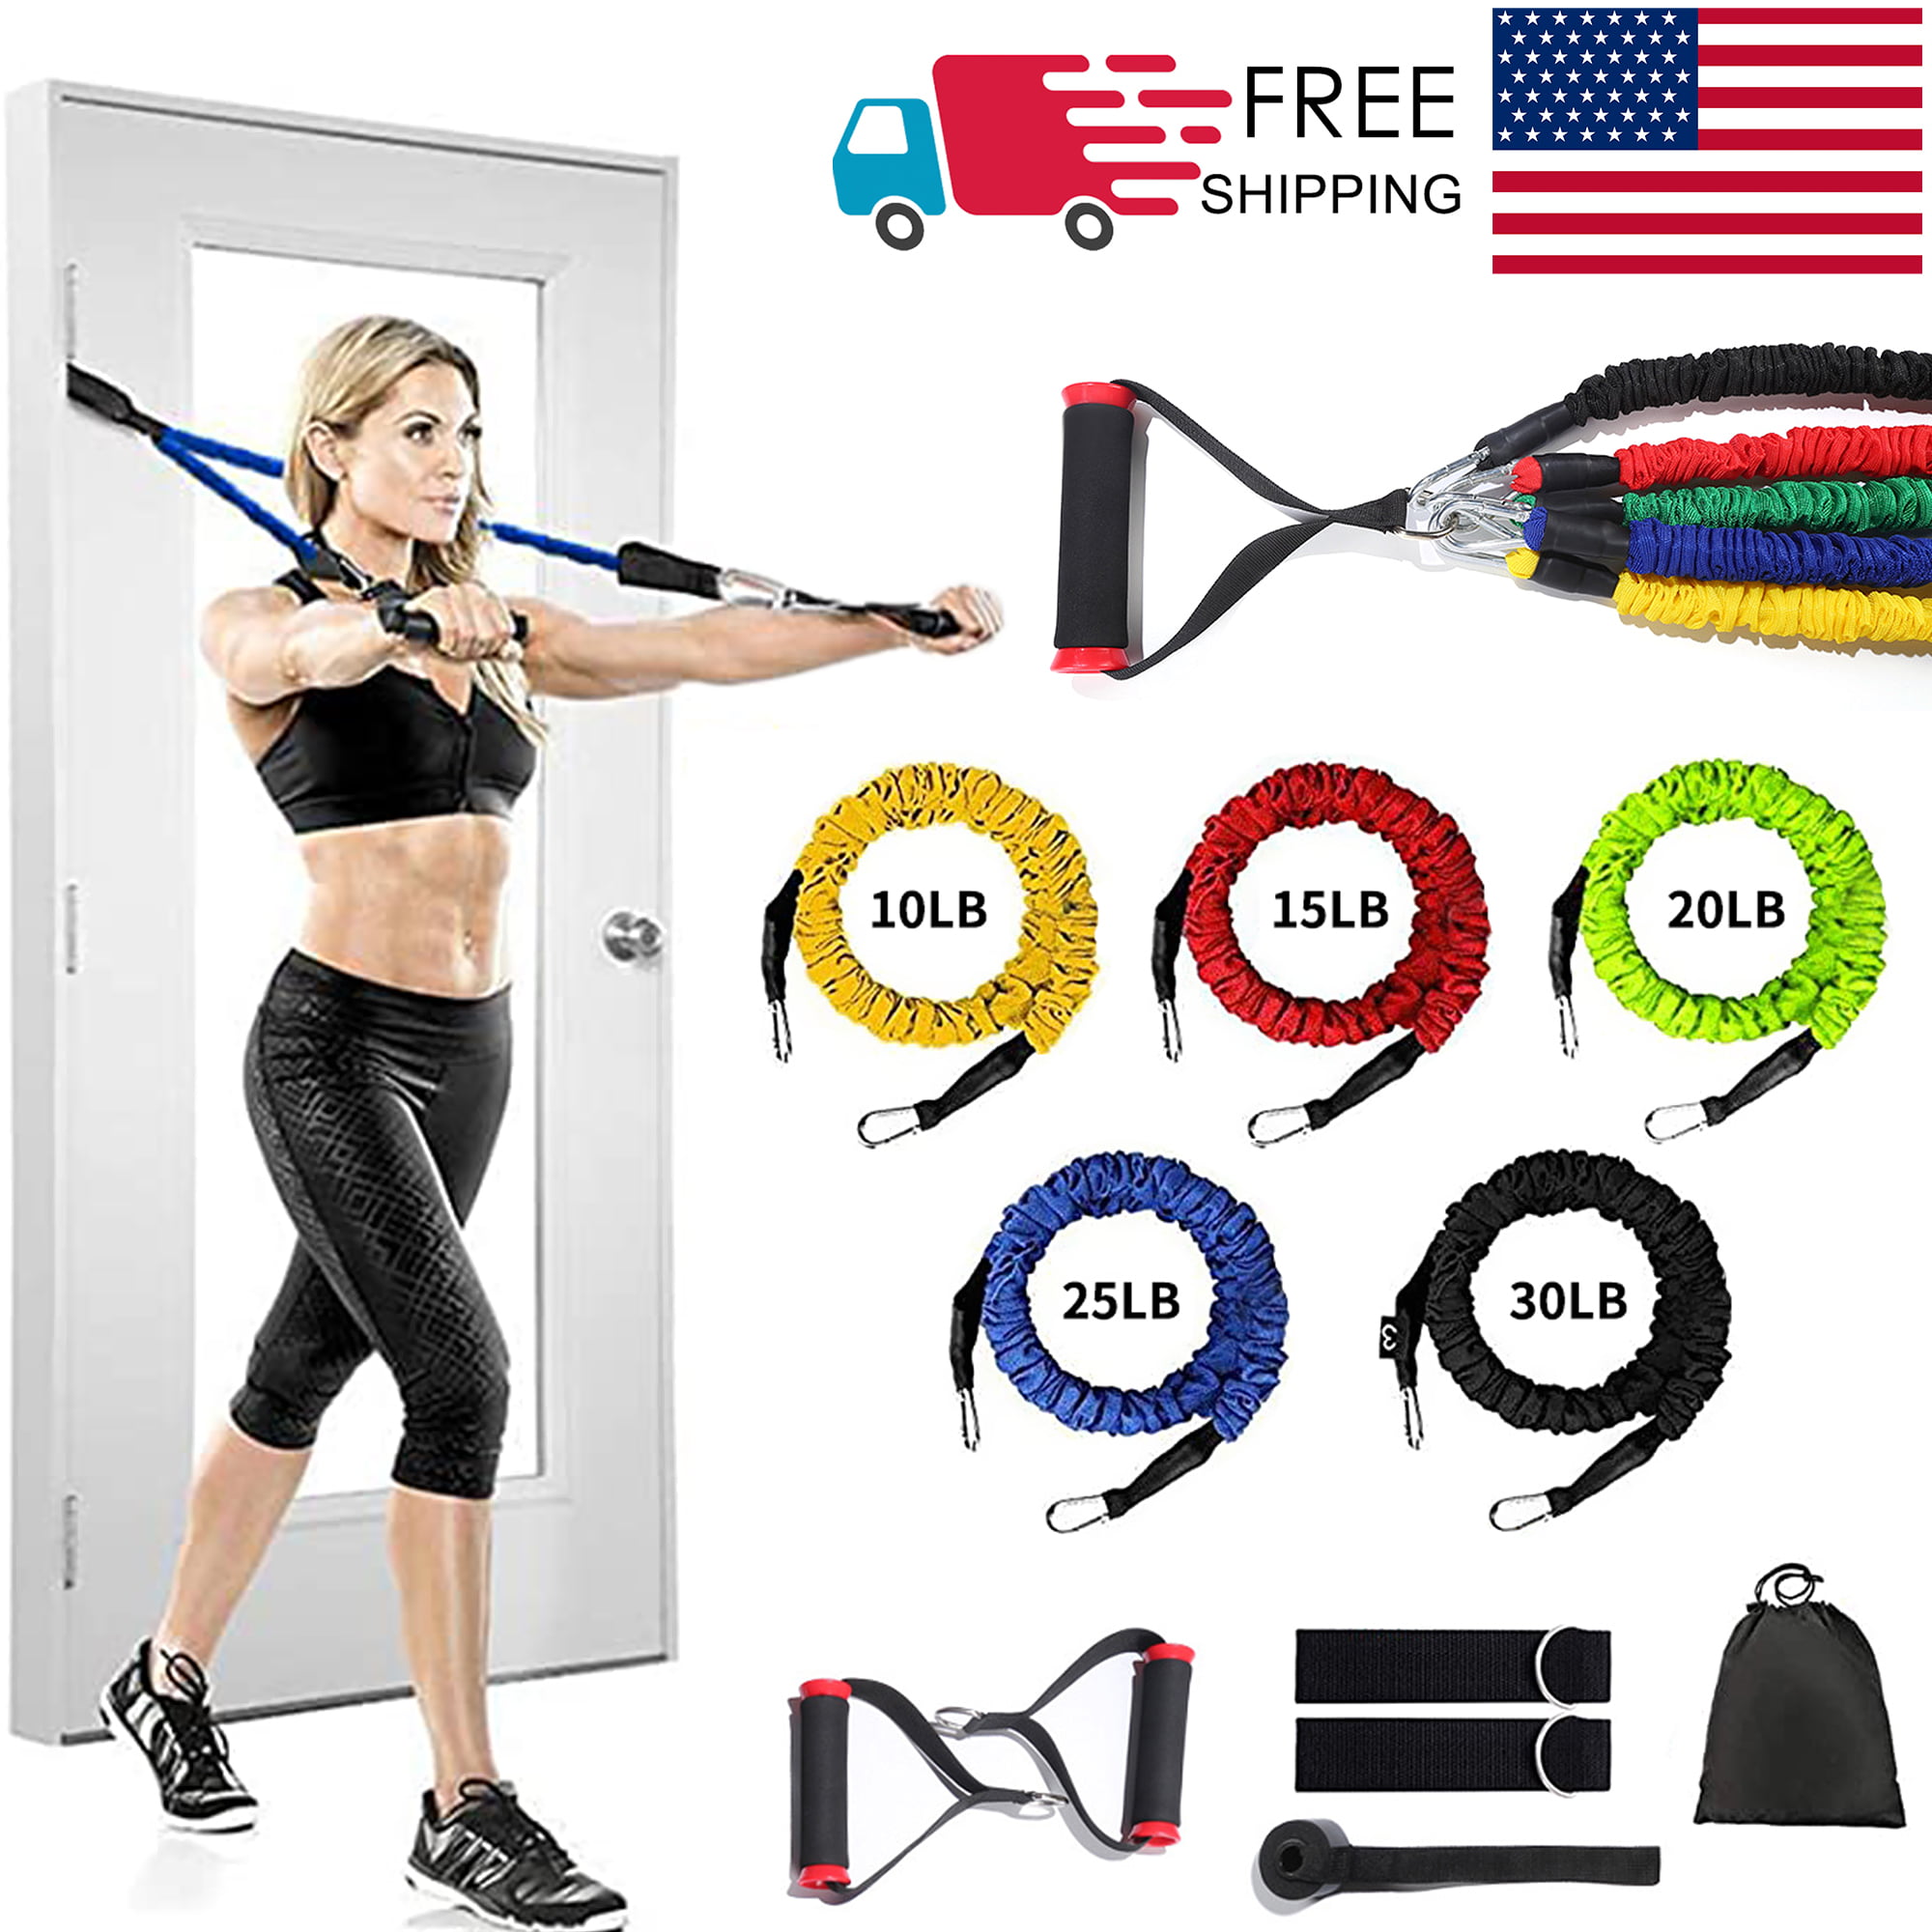 11pcs Exercise Resistance Bands Set Stackable up to 100 lbs 